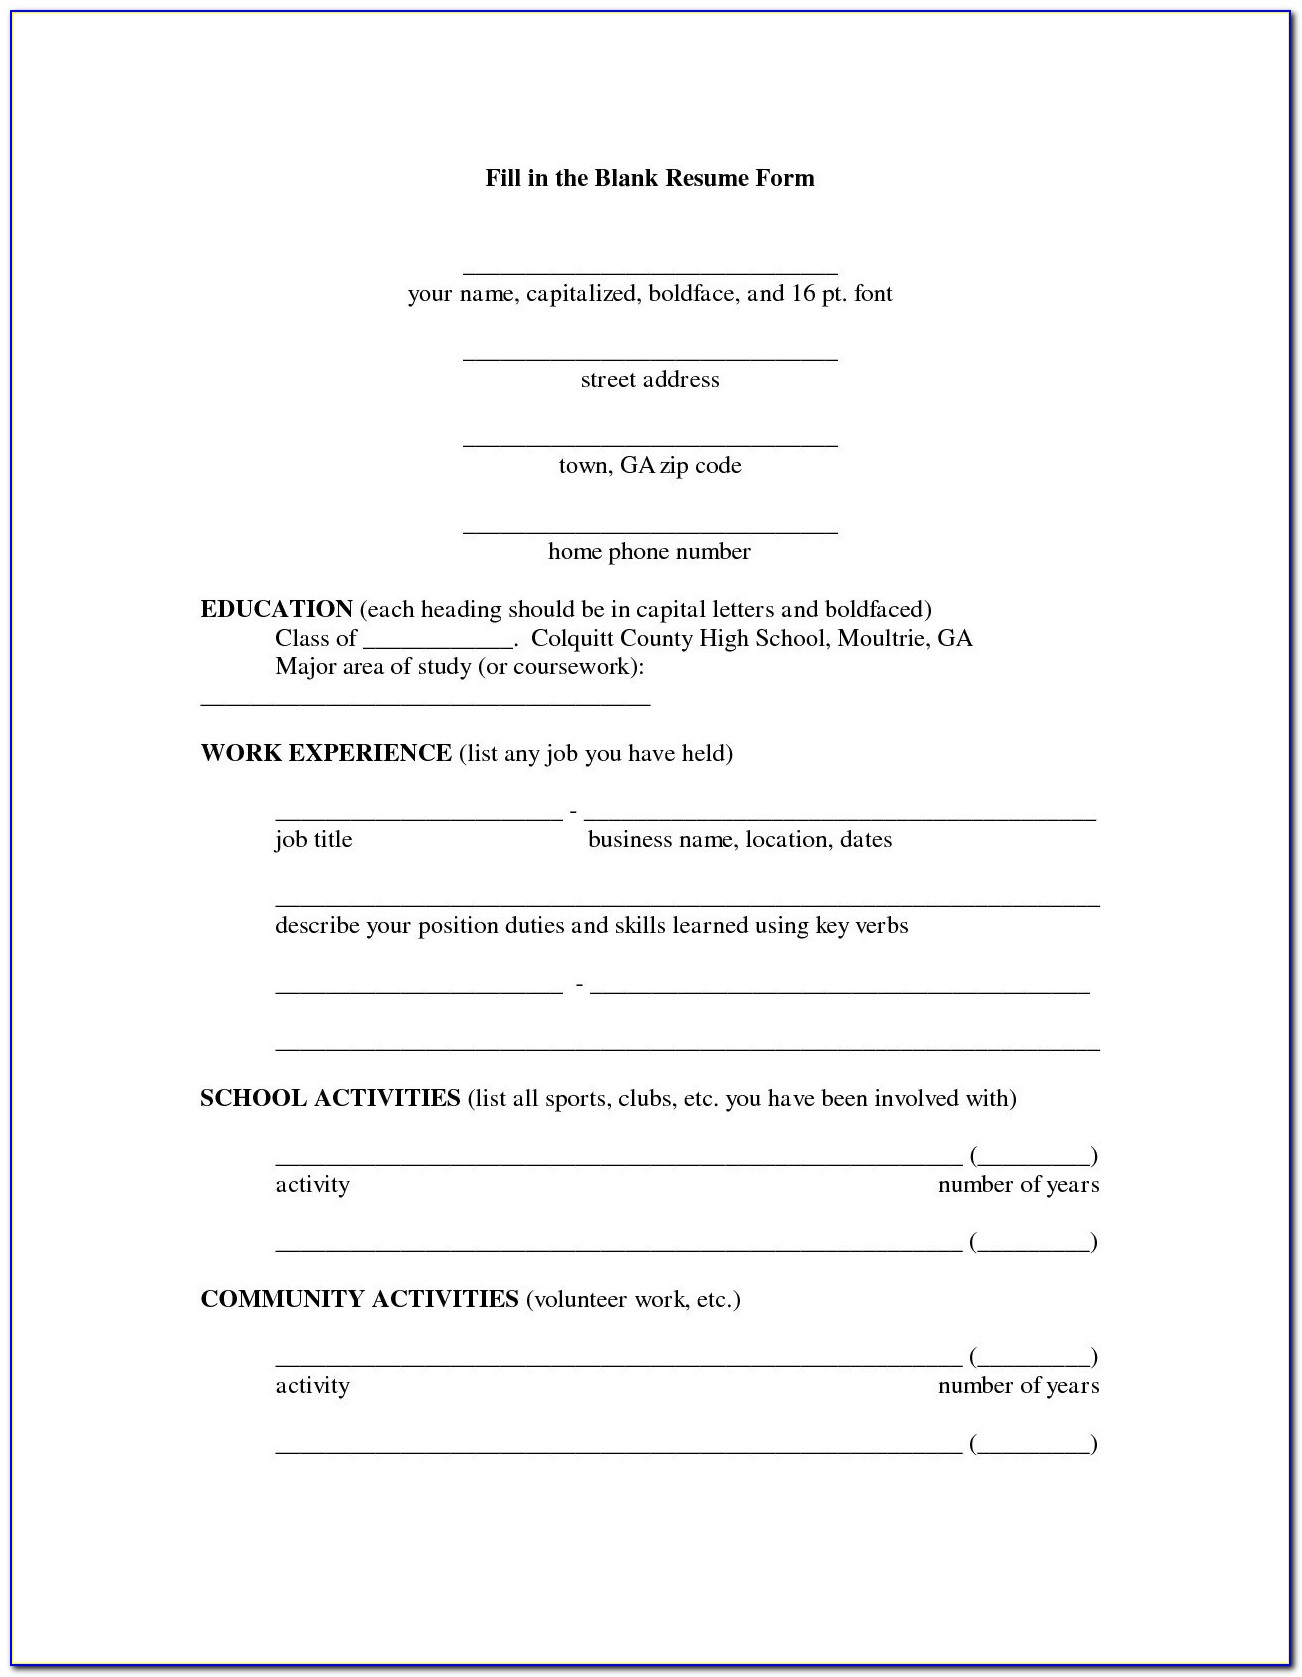 Resume Fill In The Blank Pdf Free Download